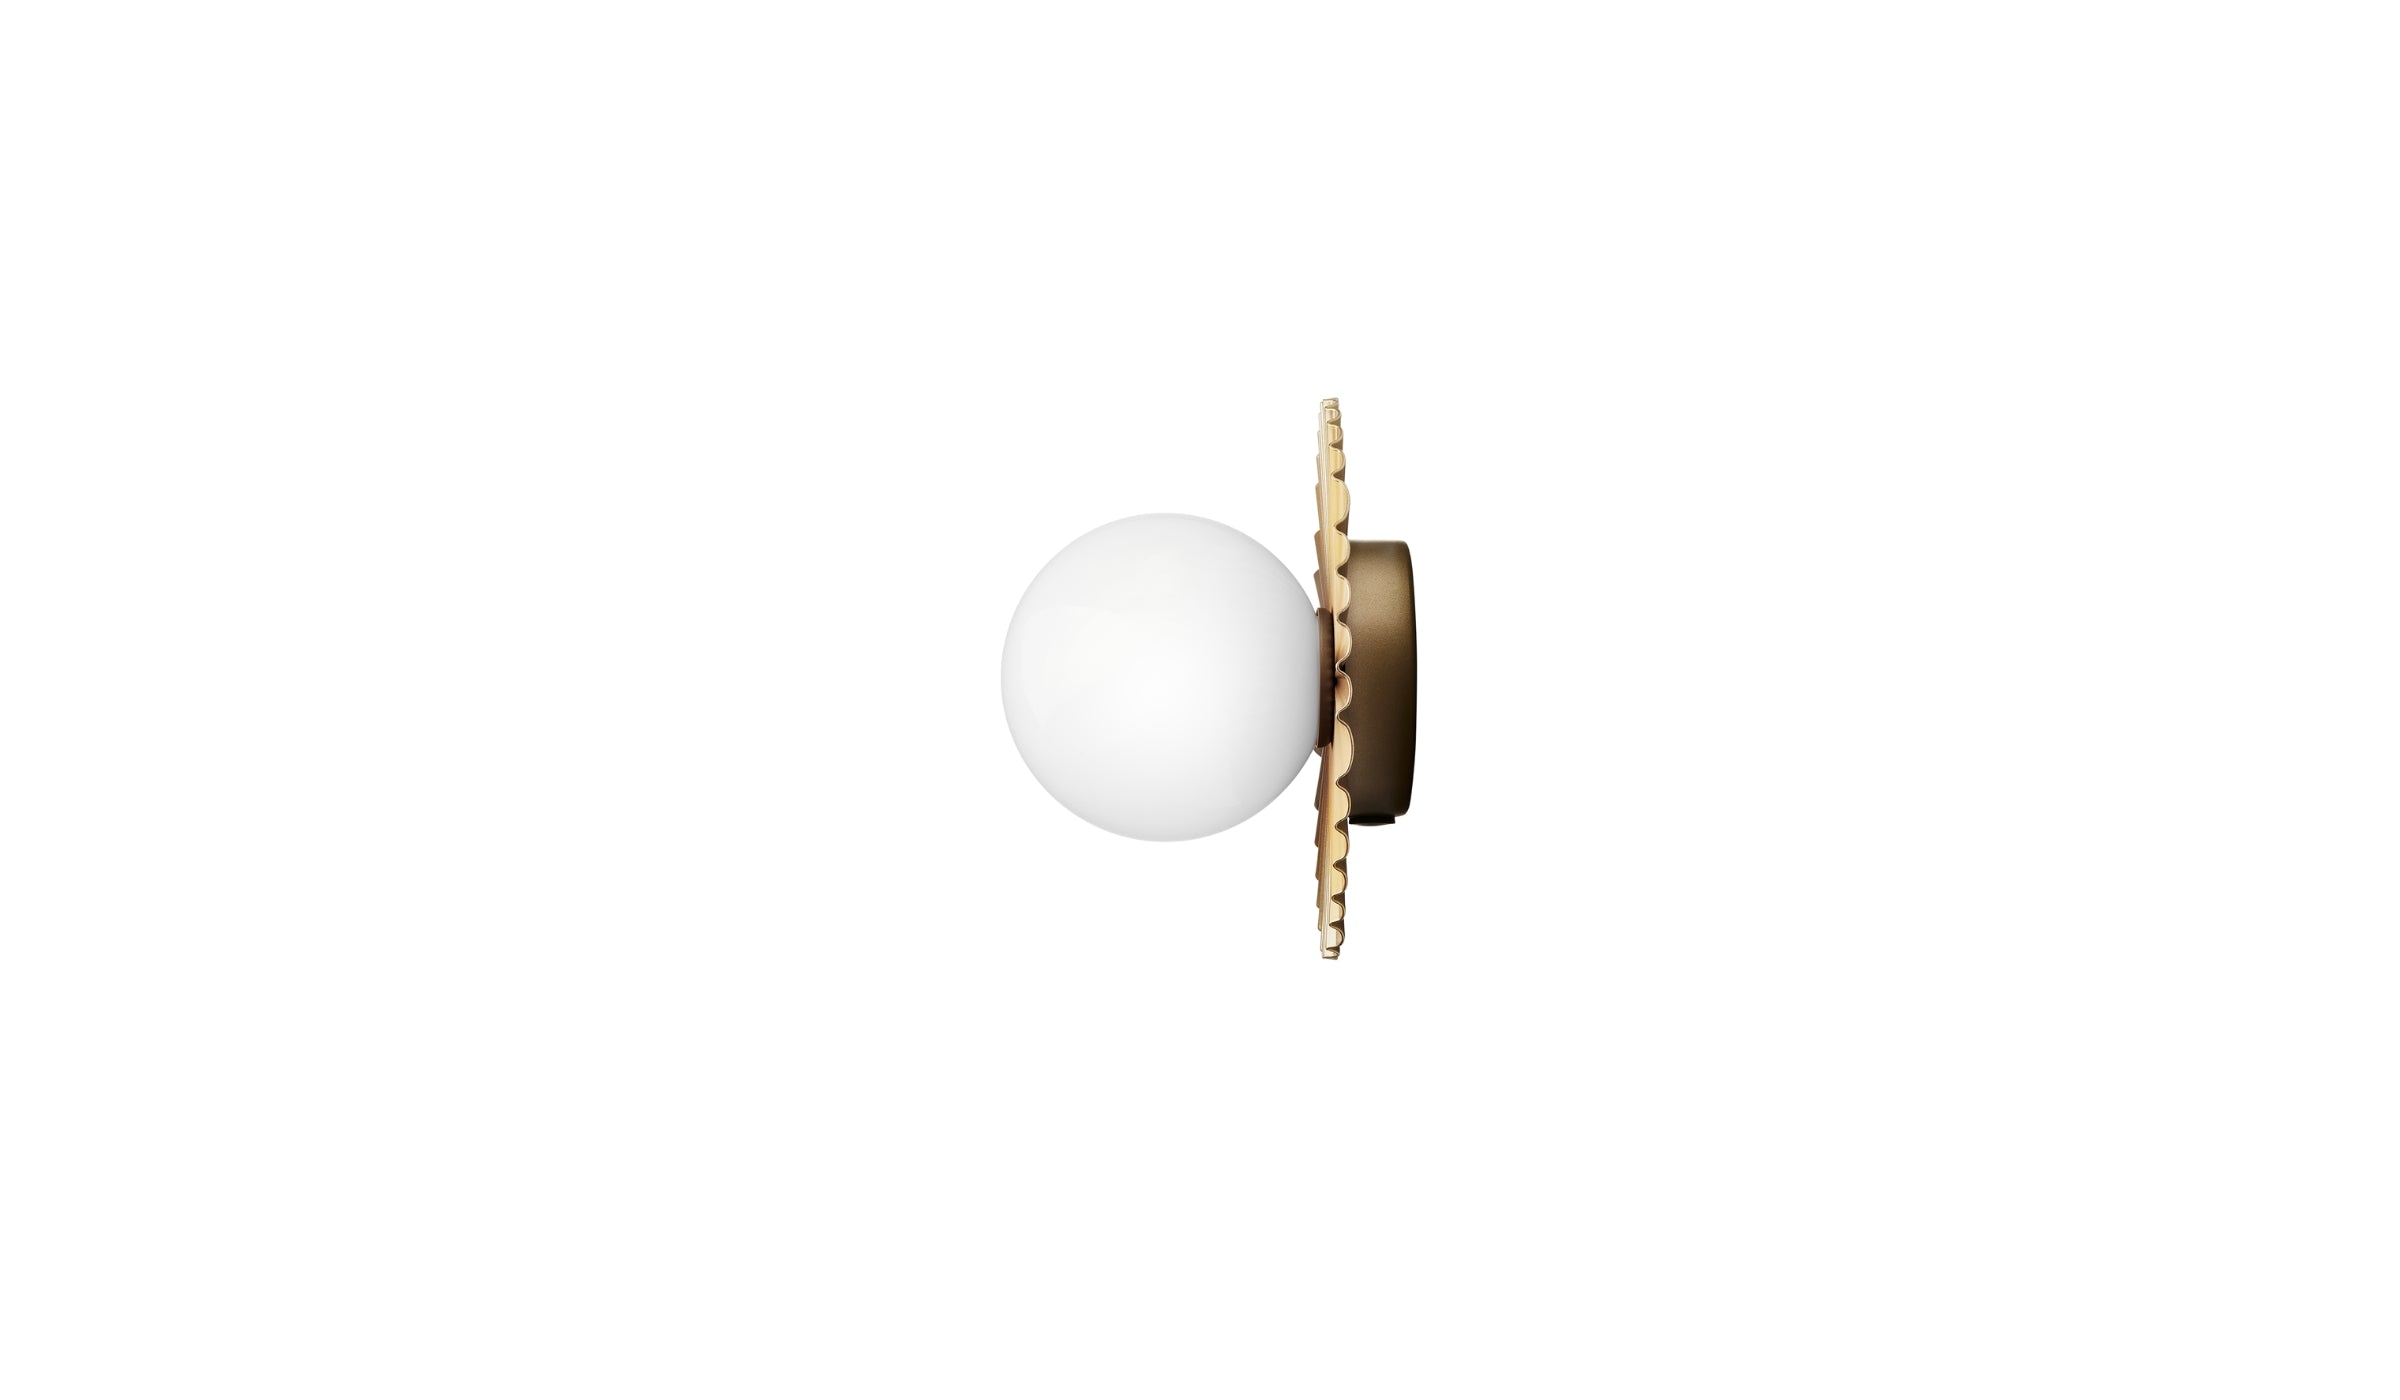 Liila Muse Small - Wall or ceiling light, opal white glass shade, Gold